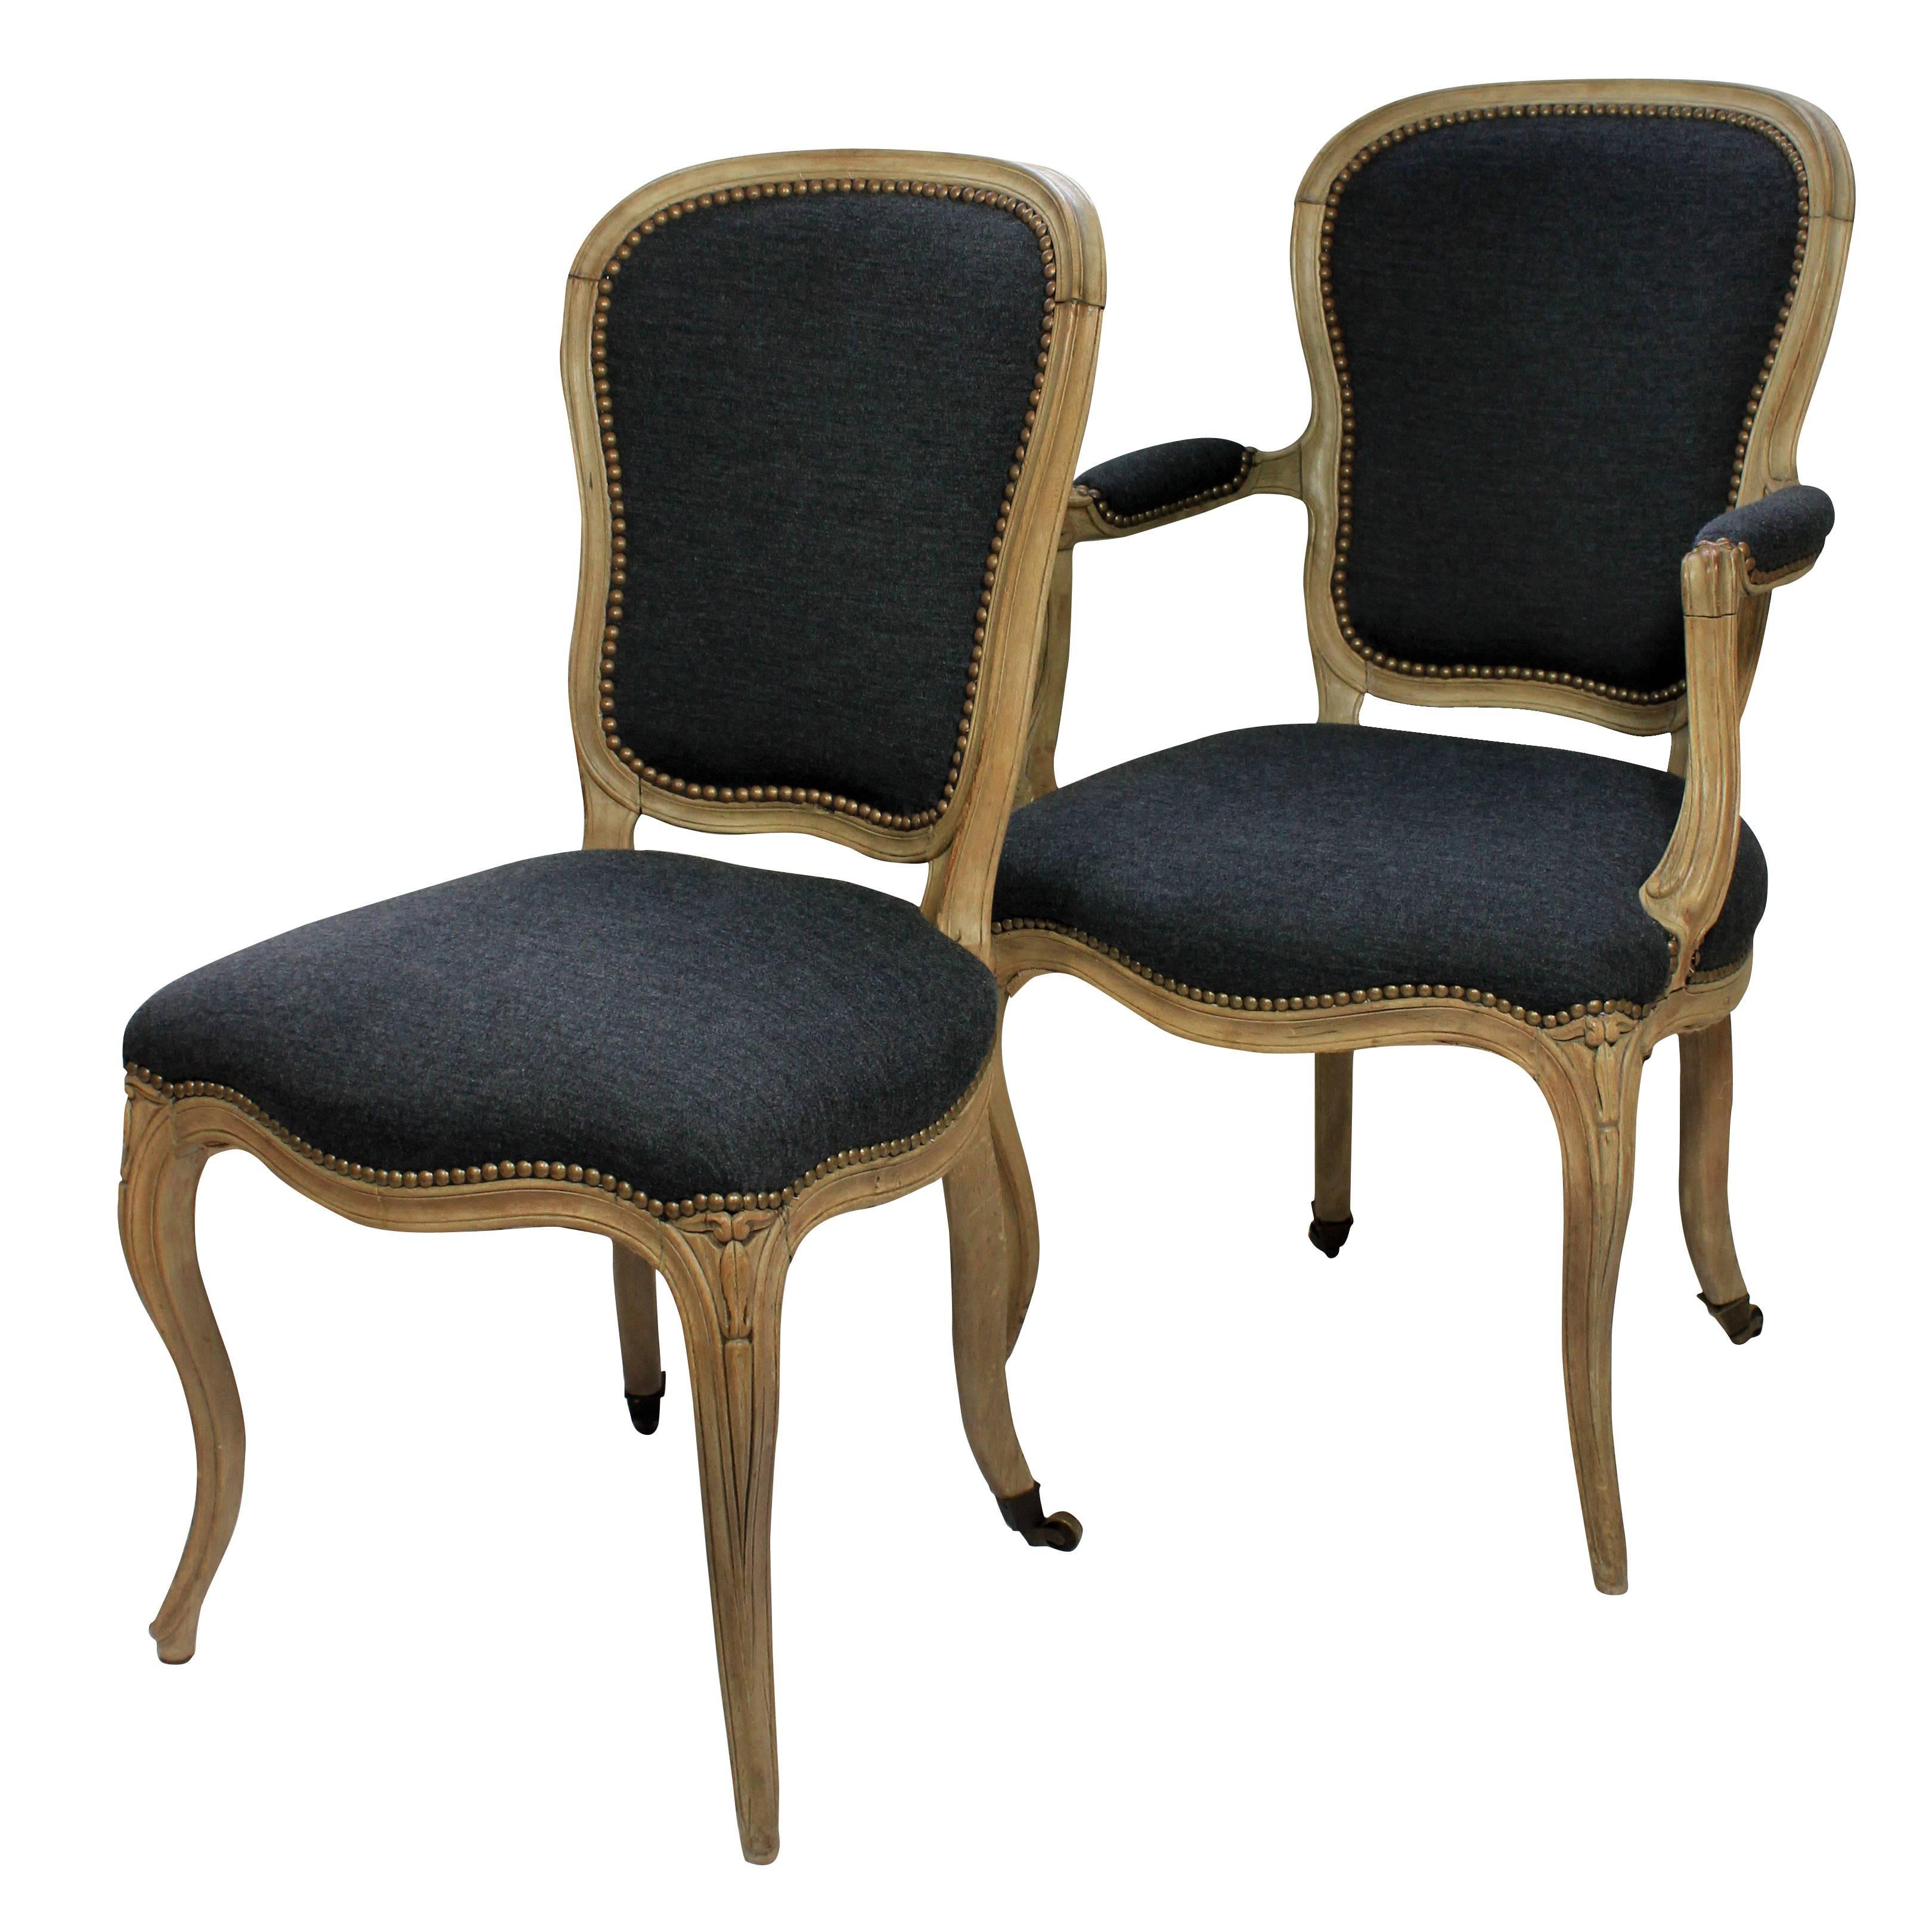 A set of four French dining chairs in bleached walnut, comprising two carvers and two side chairs. Newly upholstered in grey fabric.